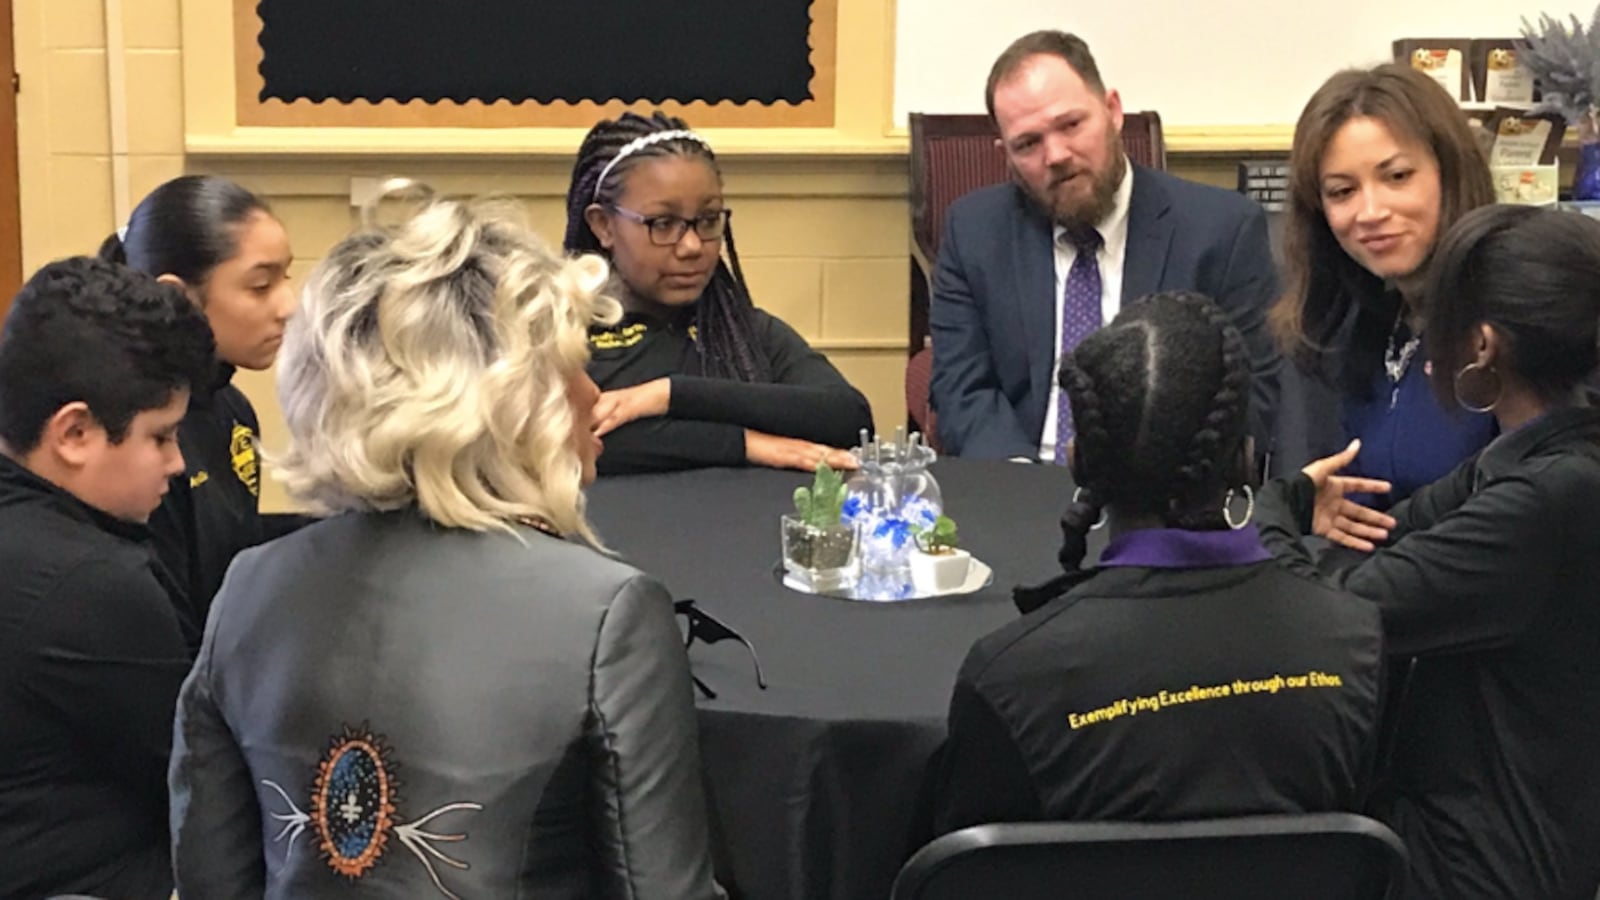 Tennessee Education Commissioner Penny Schwinn (right) speaks with students during a visit to LEAD Neely's Bend, a state-run charter school in Nashville. (Photo courtesy of LEAD Public Schools)